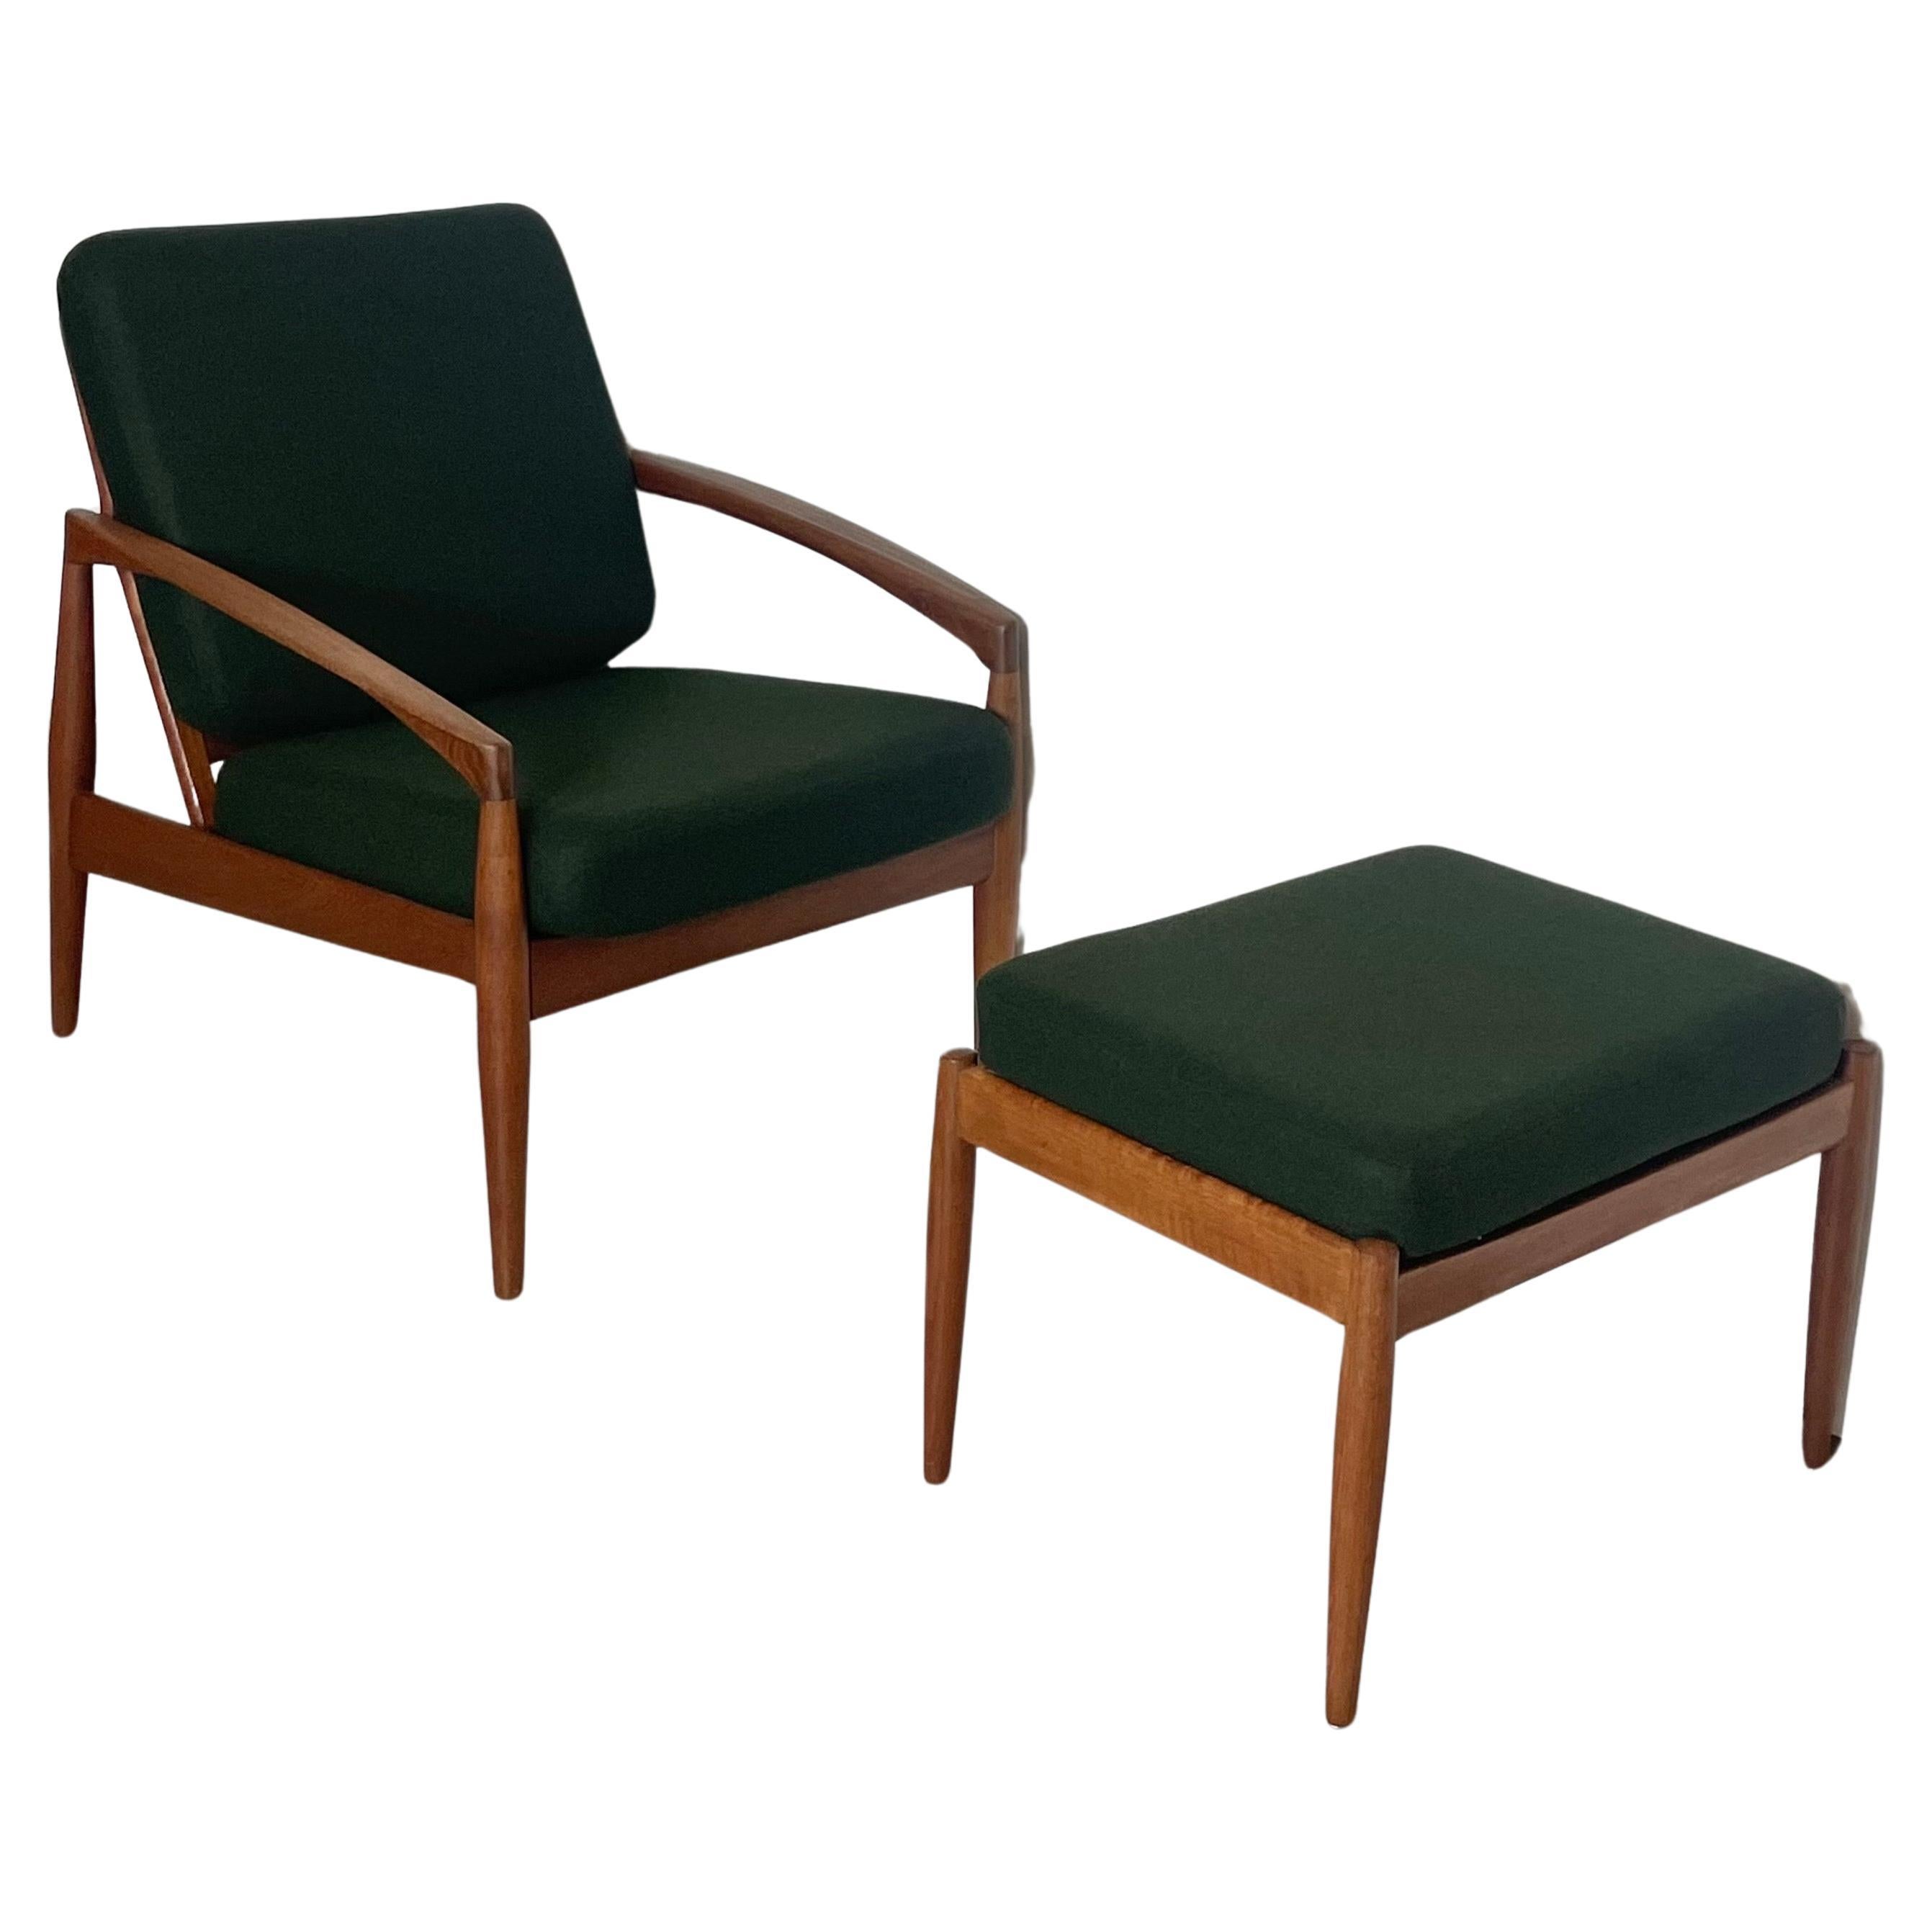 A set of Kai Kristiansen’s most celebrated design: two ‘Paper knife’ chairs crafted from solid teak wood. One of the most graceful and beautiful chairs of the Danish Modern period. The set is accoplished by a matching ottomann, also made of solid